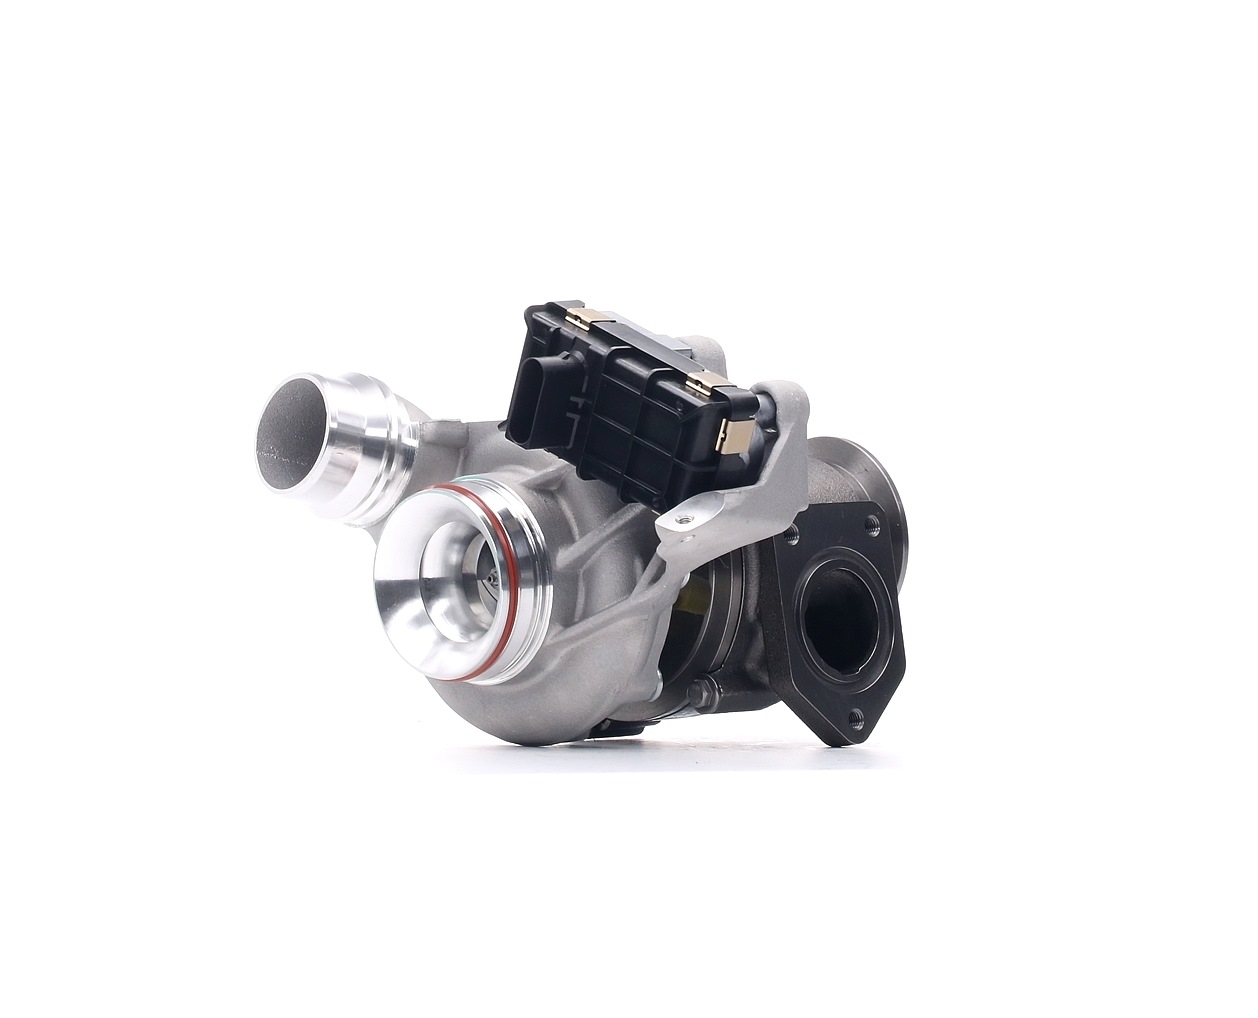 STARK SKCT-1190183 Turbocharger Exhaust Turbocharger, VNT / VTG, Electric, without attachment material